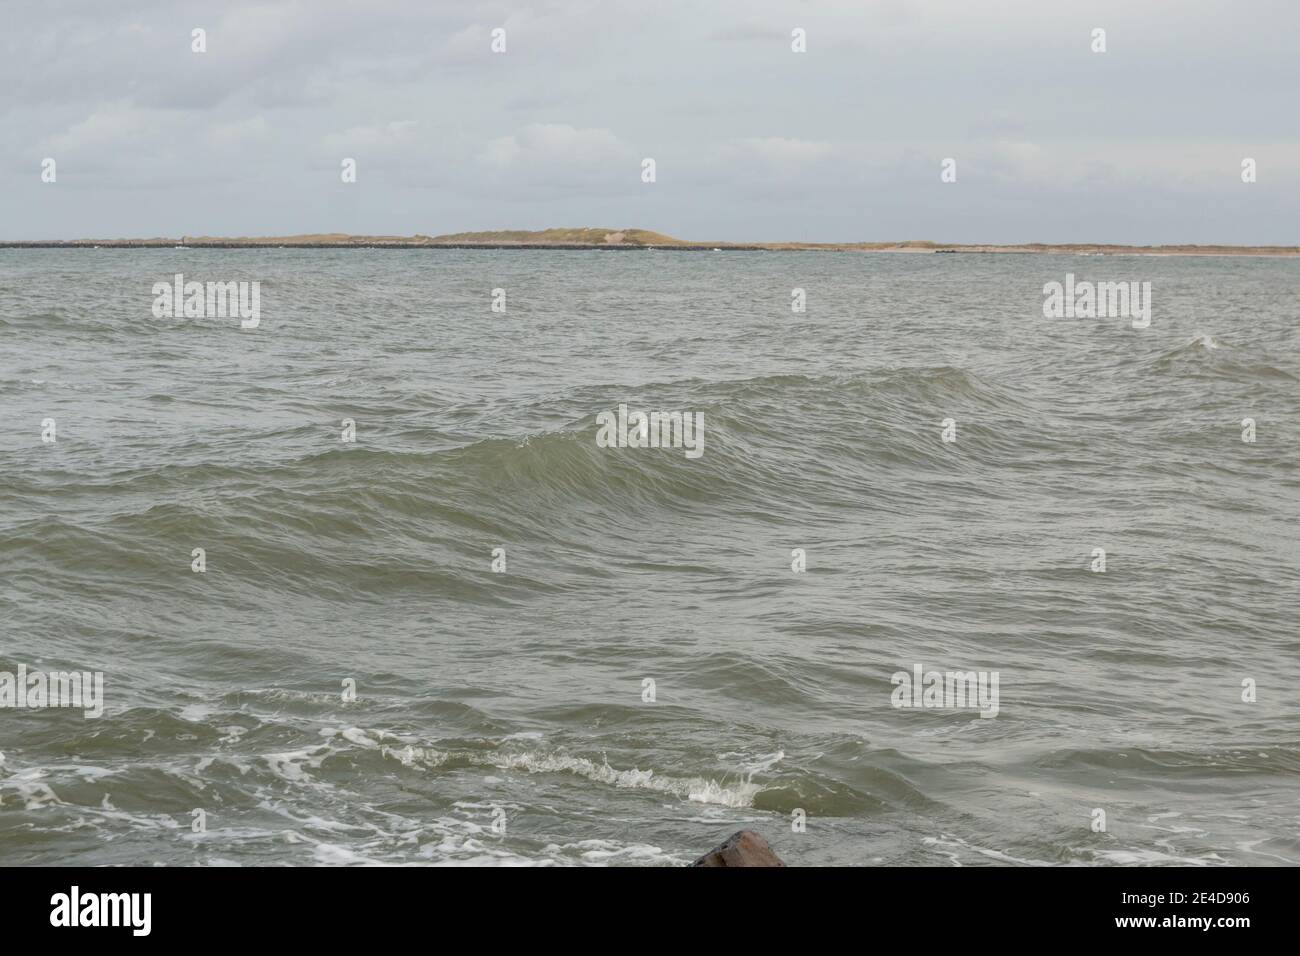 Coast line at Thyboron on the Danish west coast, clouds in the sky, waves in the sea, white foam splashes, rocks. Stock Photo